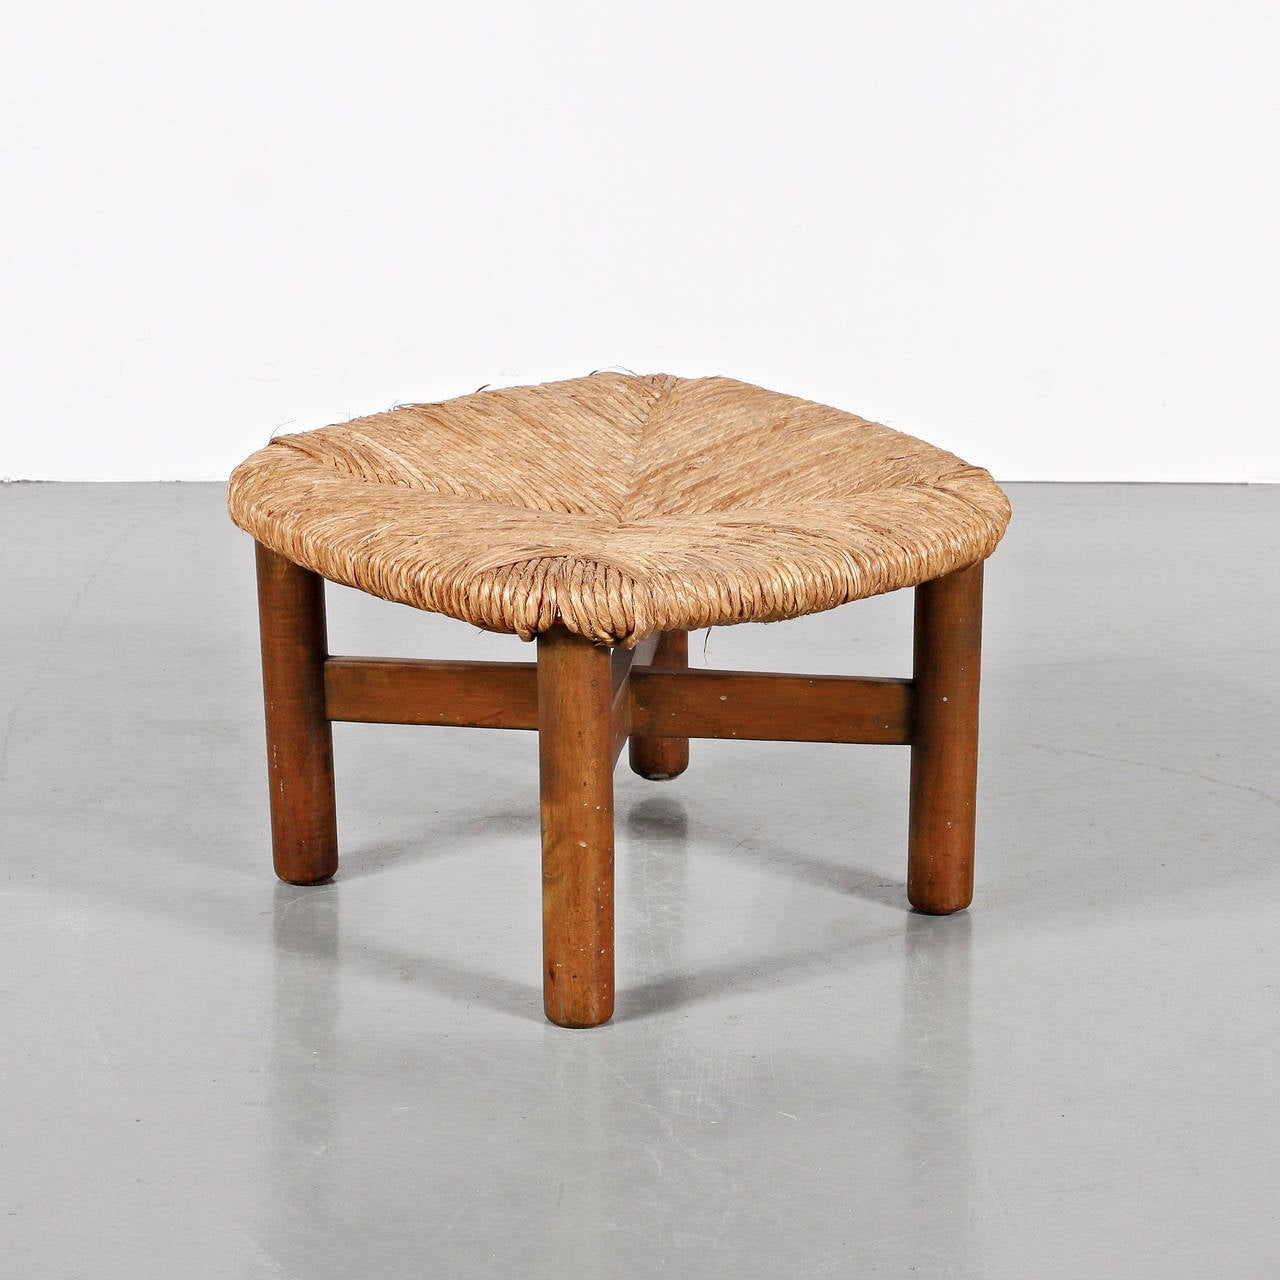 Wicker stool designed by Wim Boon, circa 1950.
Manufactured in Netherlands.
Walnut wooden legs, rattan seat.

In good original condition, preserving a beautiful patina.